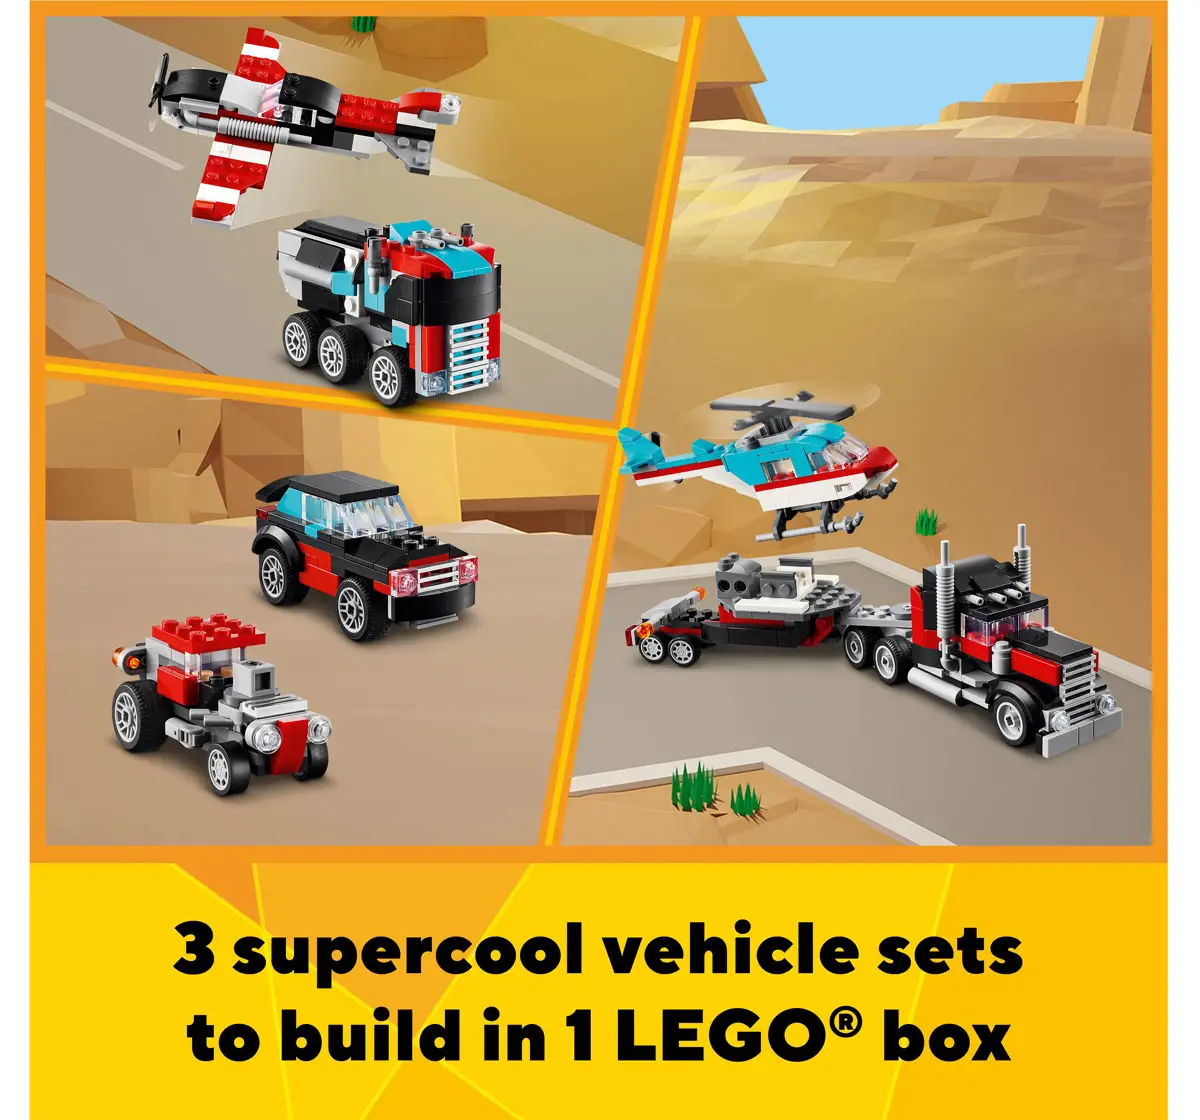 Lego Creator Flatbed Truck With Helicopter Toy 31146 Multicolour For Kids Ages 7Y+ (270 Pieces) 